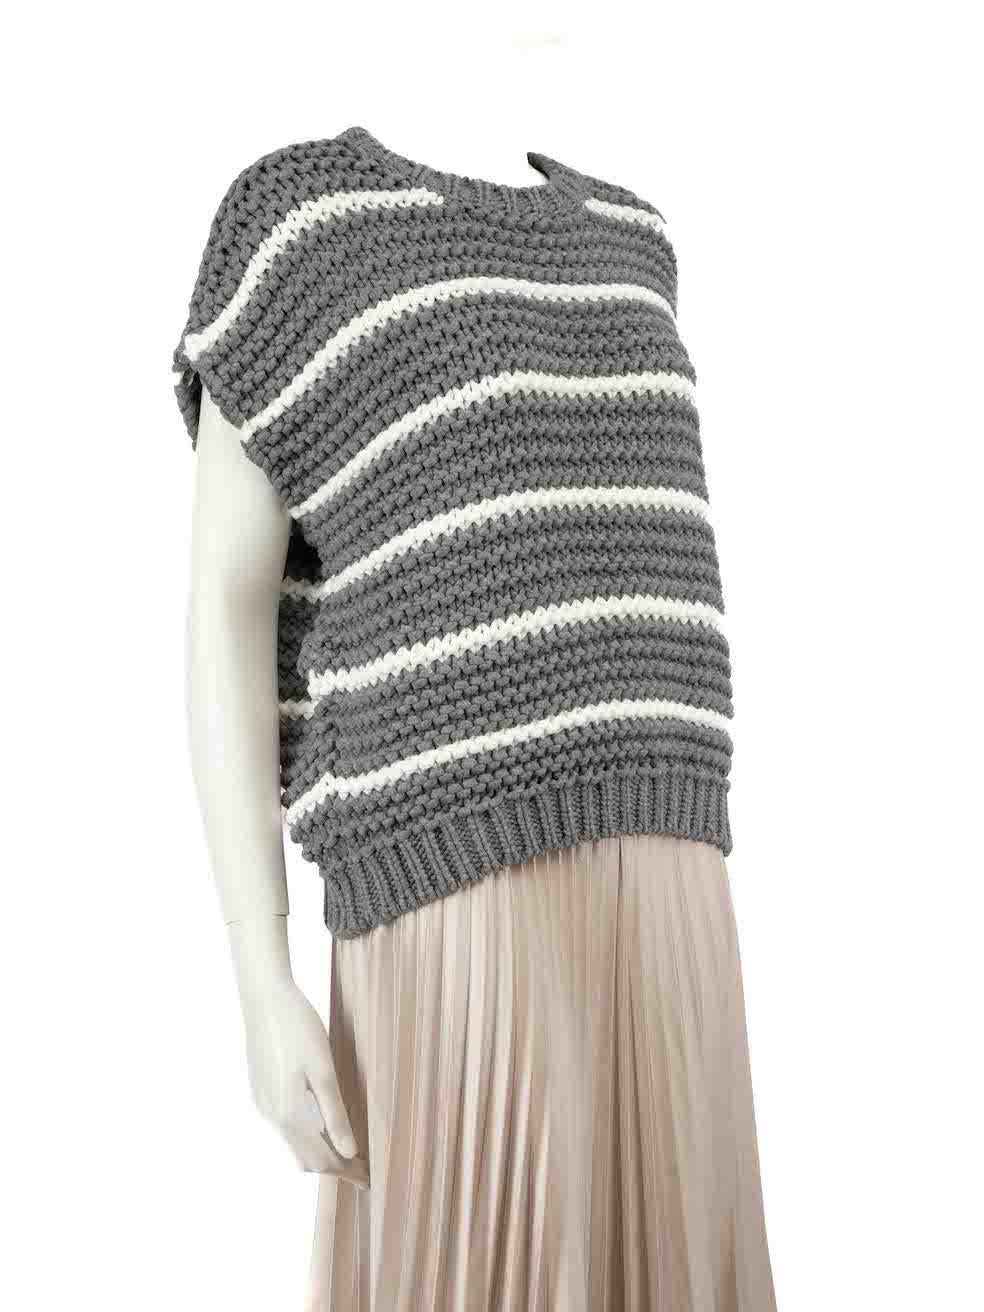 CONDITION is Very good. Hardly any visible wear to is evident on this used Brunello Cucinelli designer resale item.
 
 
 
 Details
 
 
 Grey
 
 Cotton
 
 Chunky knit top
 
 Striped pattern
 
 Sleeveless
 
 Round neck
 
 Oversized fit
 
 
 
 
 
 Made